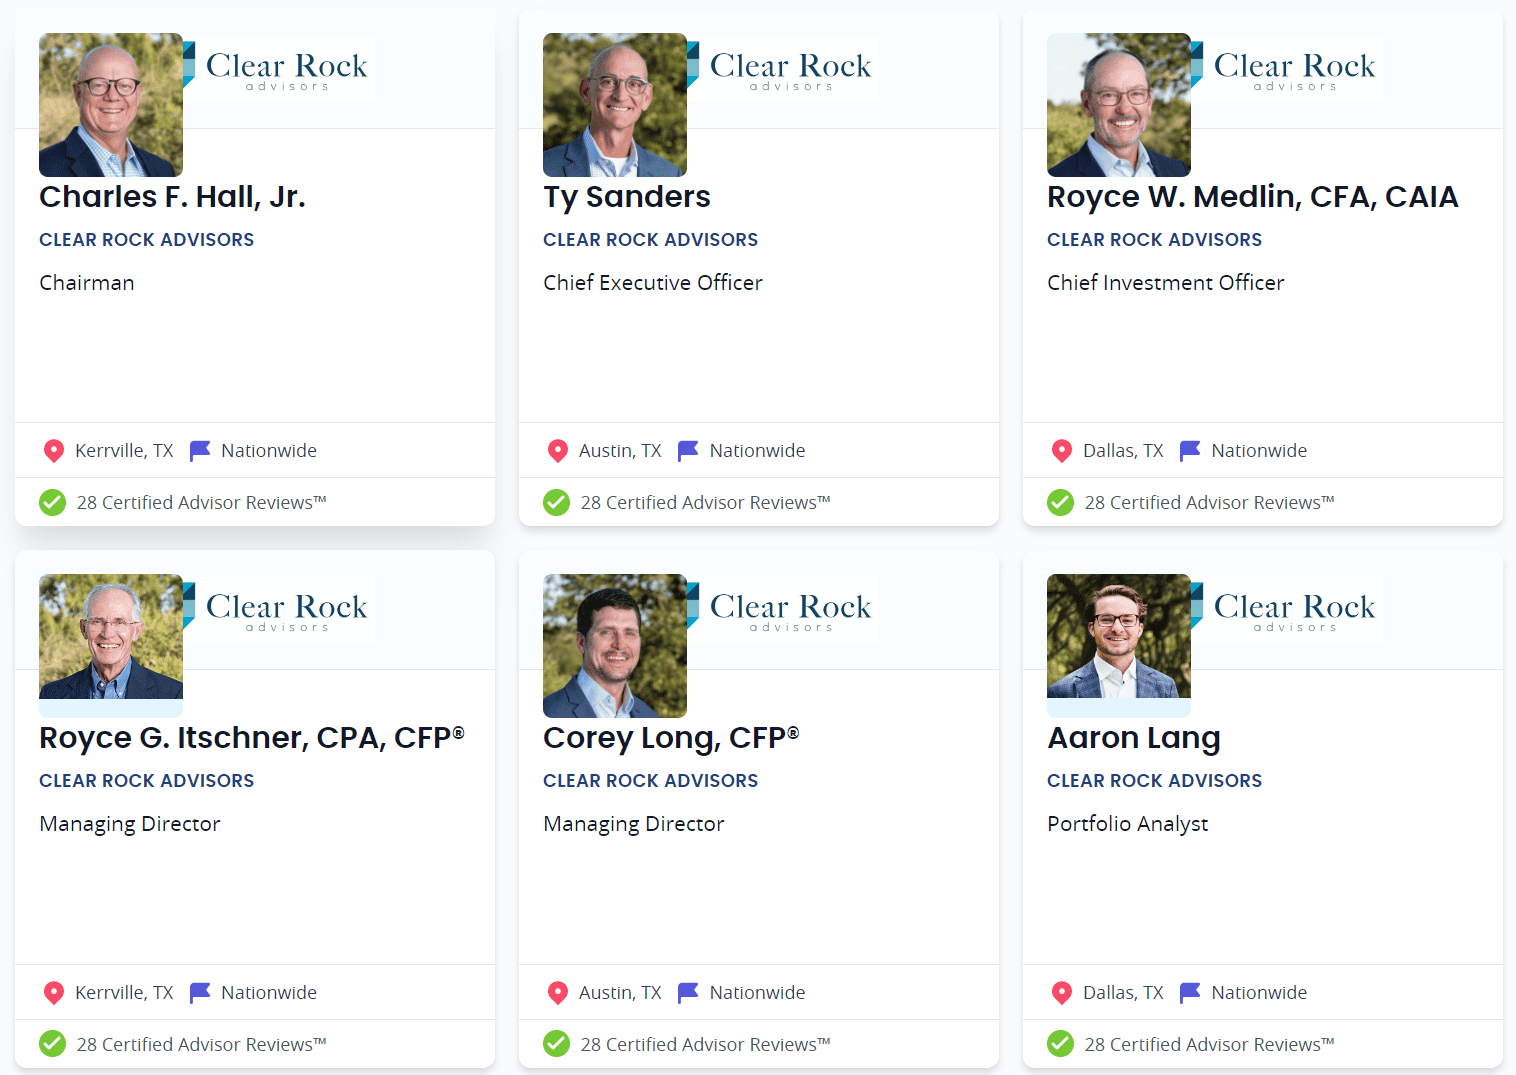 Image displays six professional profile cards of individuals from clear rock advisors, each containing a name, title, location, company logo, and number of certified advisor reviews.